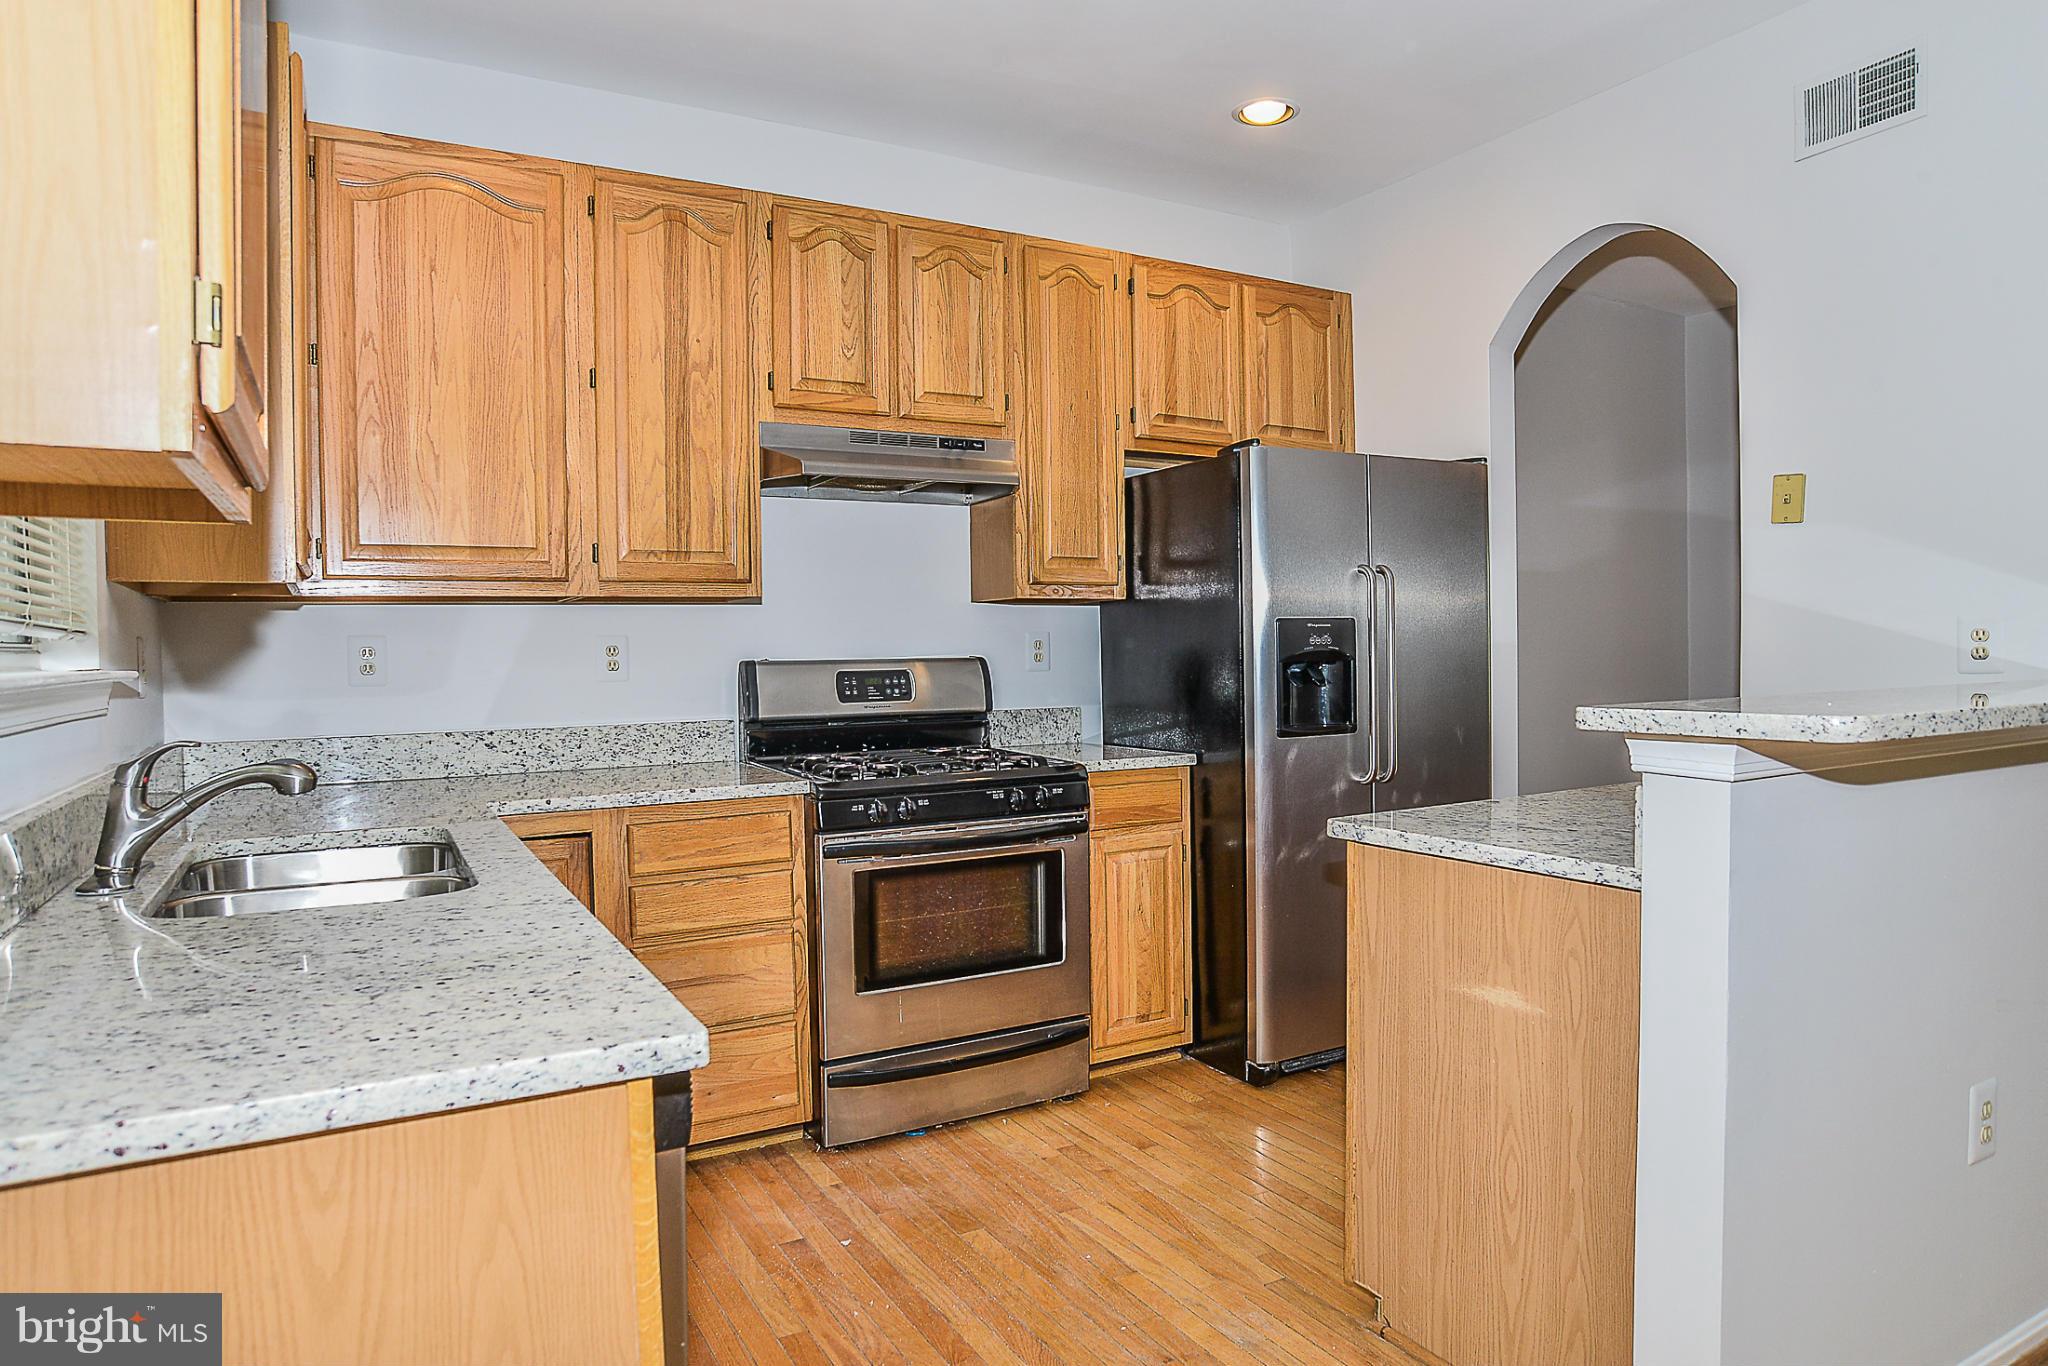 a kitchen with kitchen island granite countertop wooden cabinets stainless steel appliances and a window